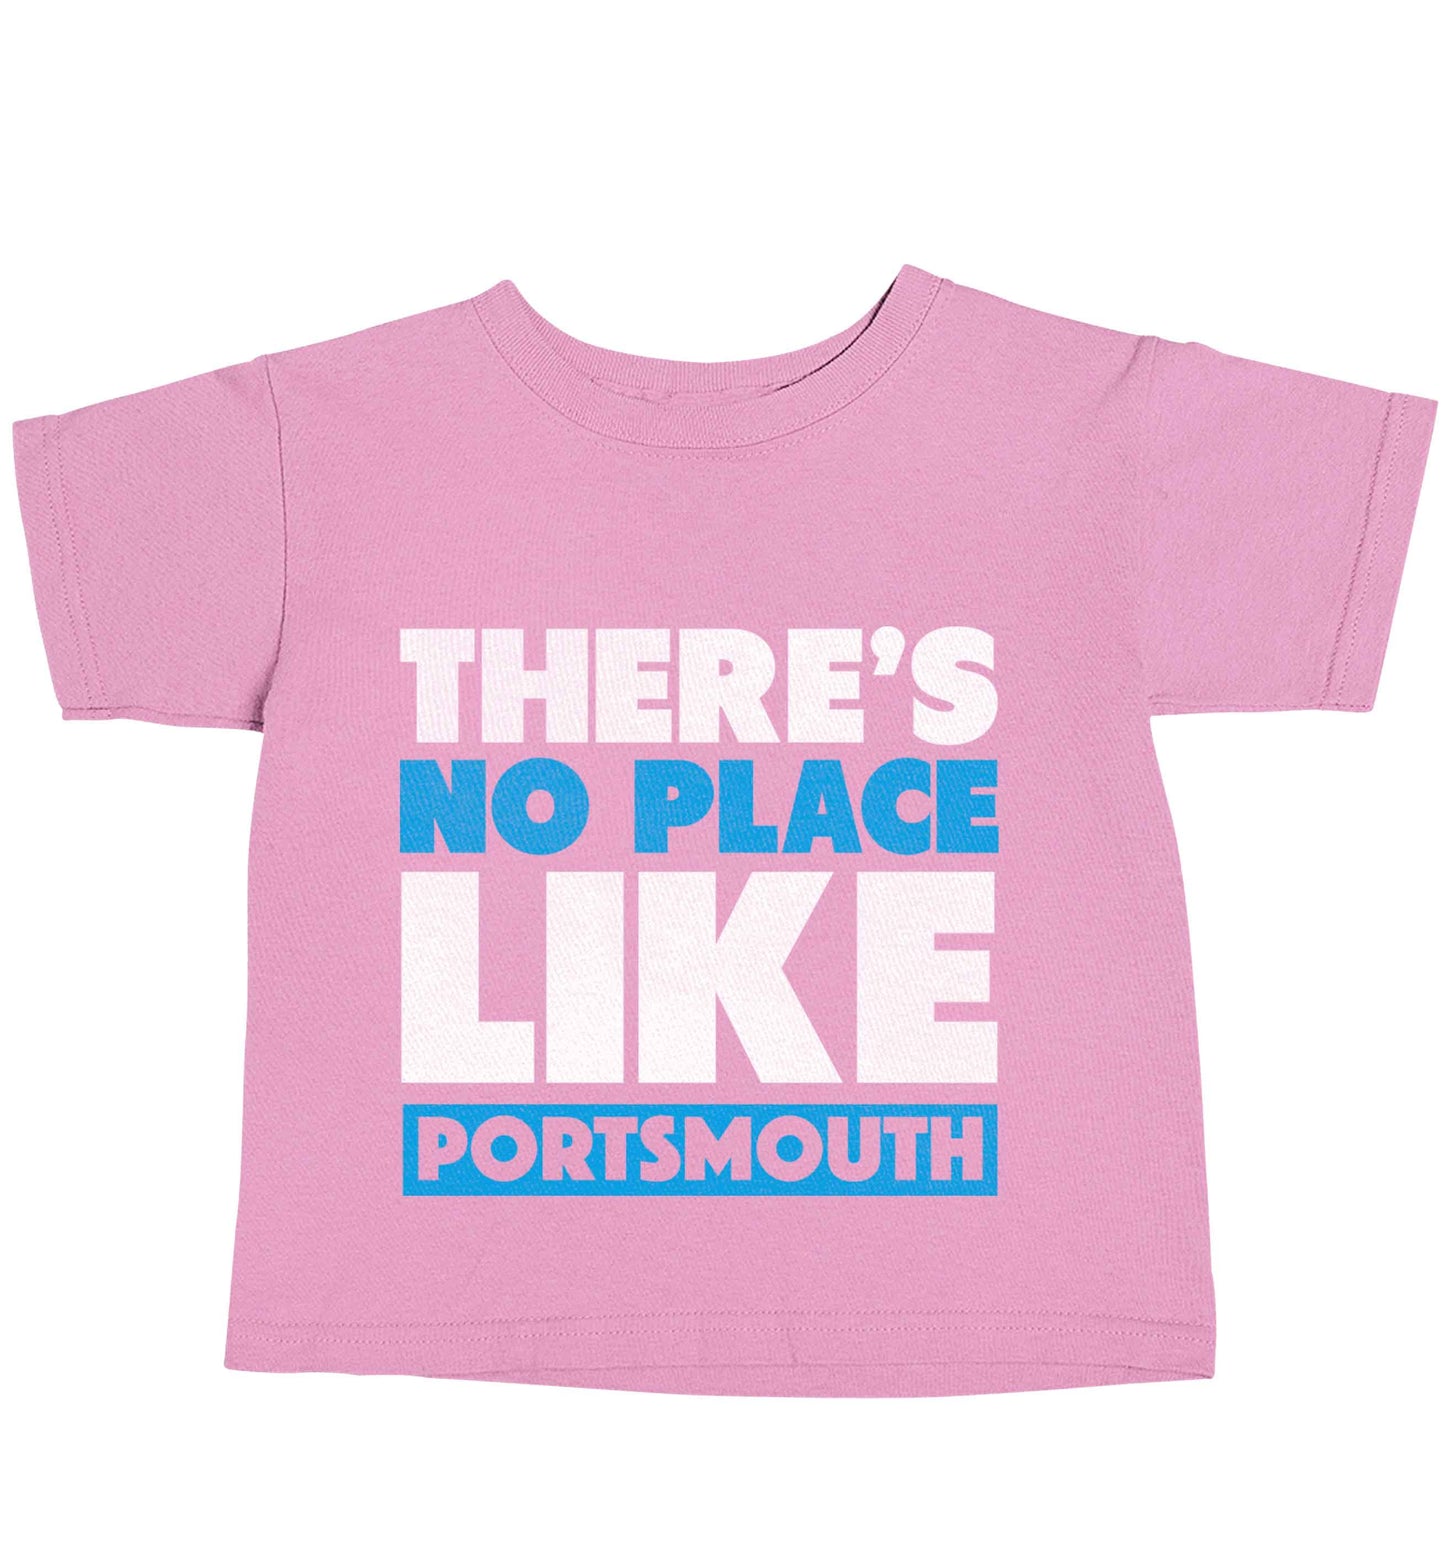 There's no place like Porstmouth light pink baby toddler Tshirt 2 Years